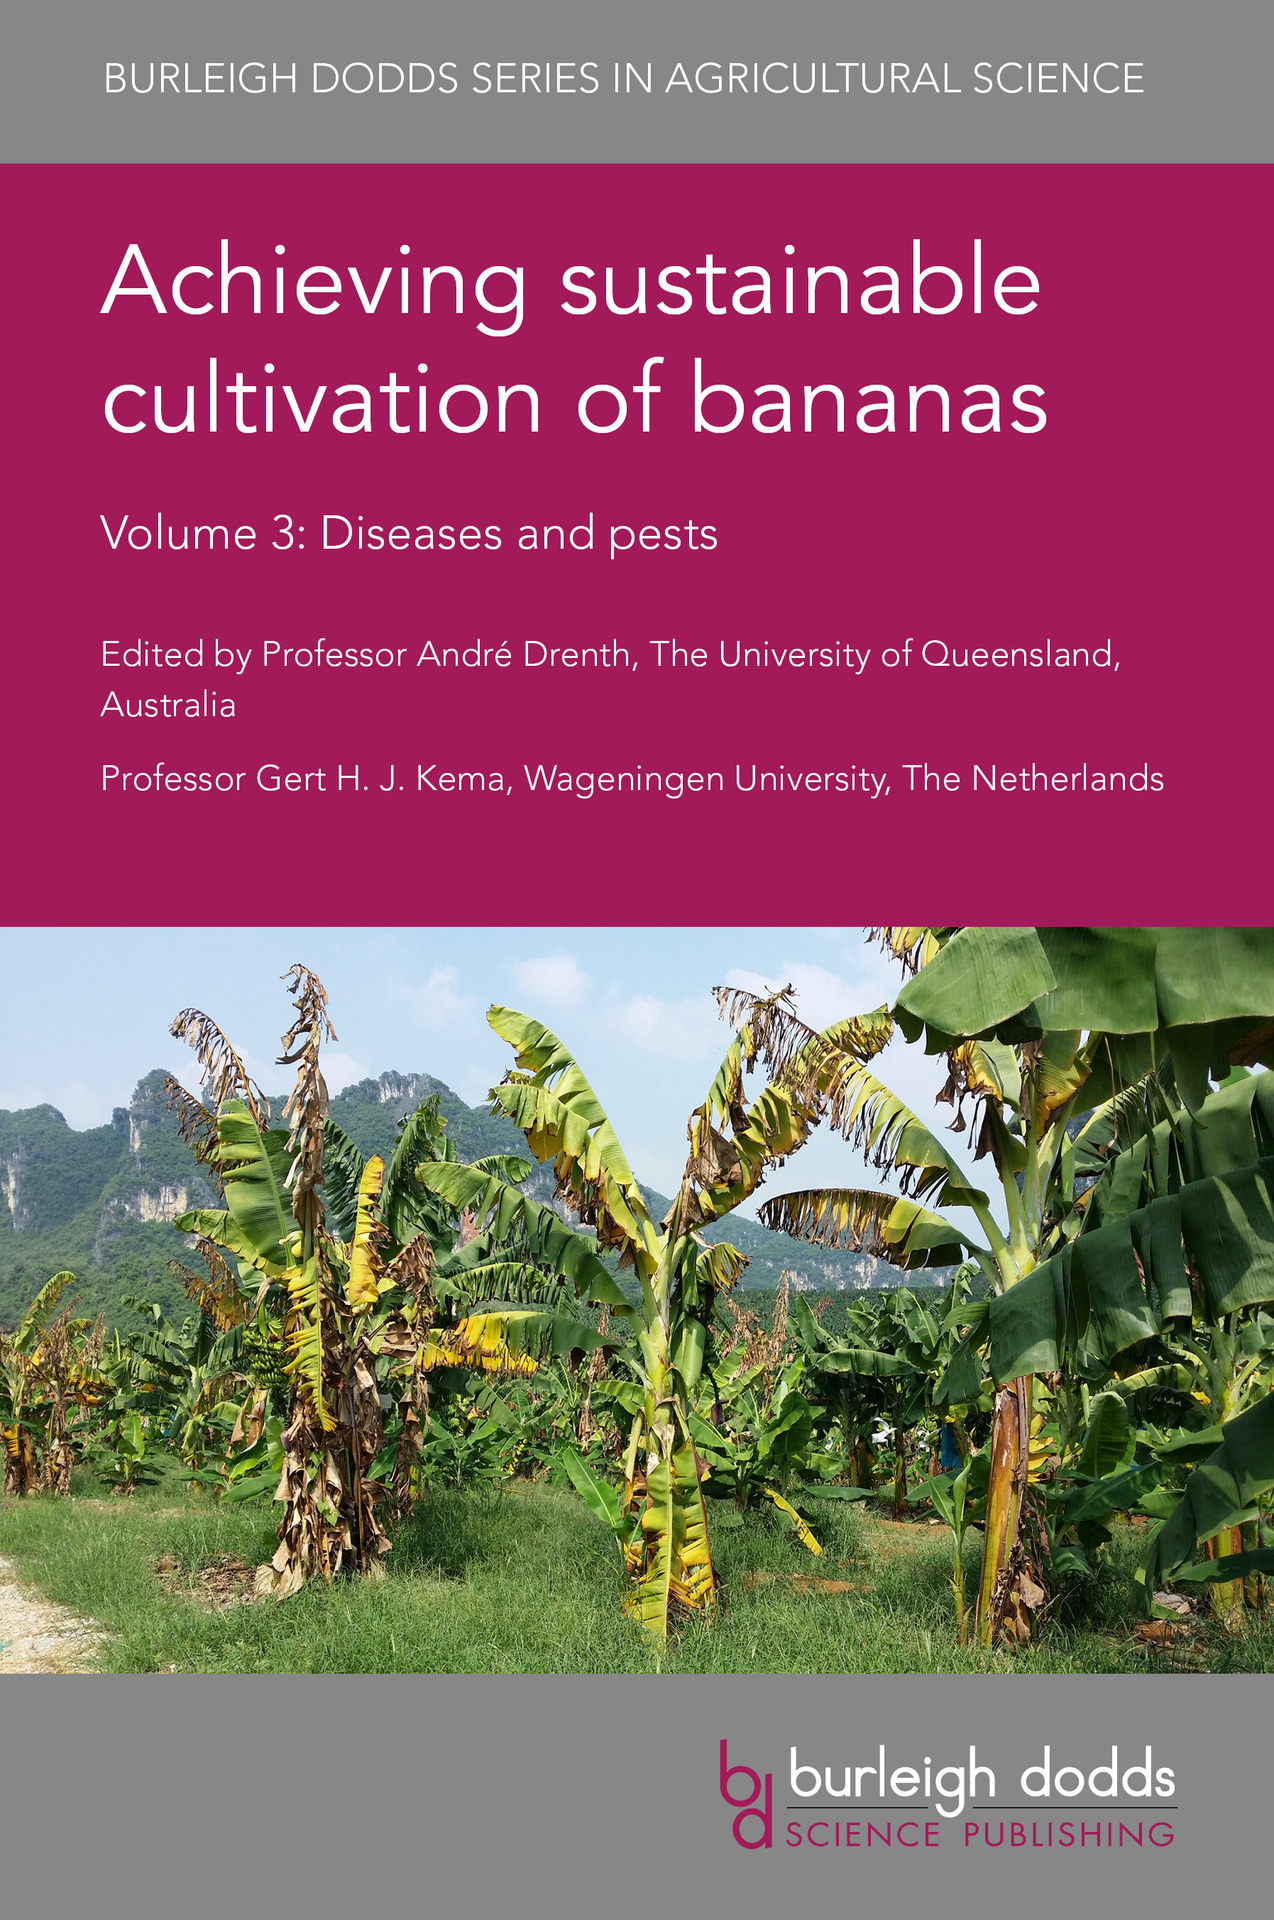 Achieving sustainable cultivation of bananas - Volume 3: Diseases and pests